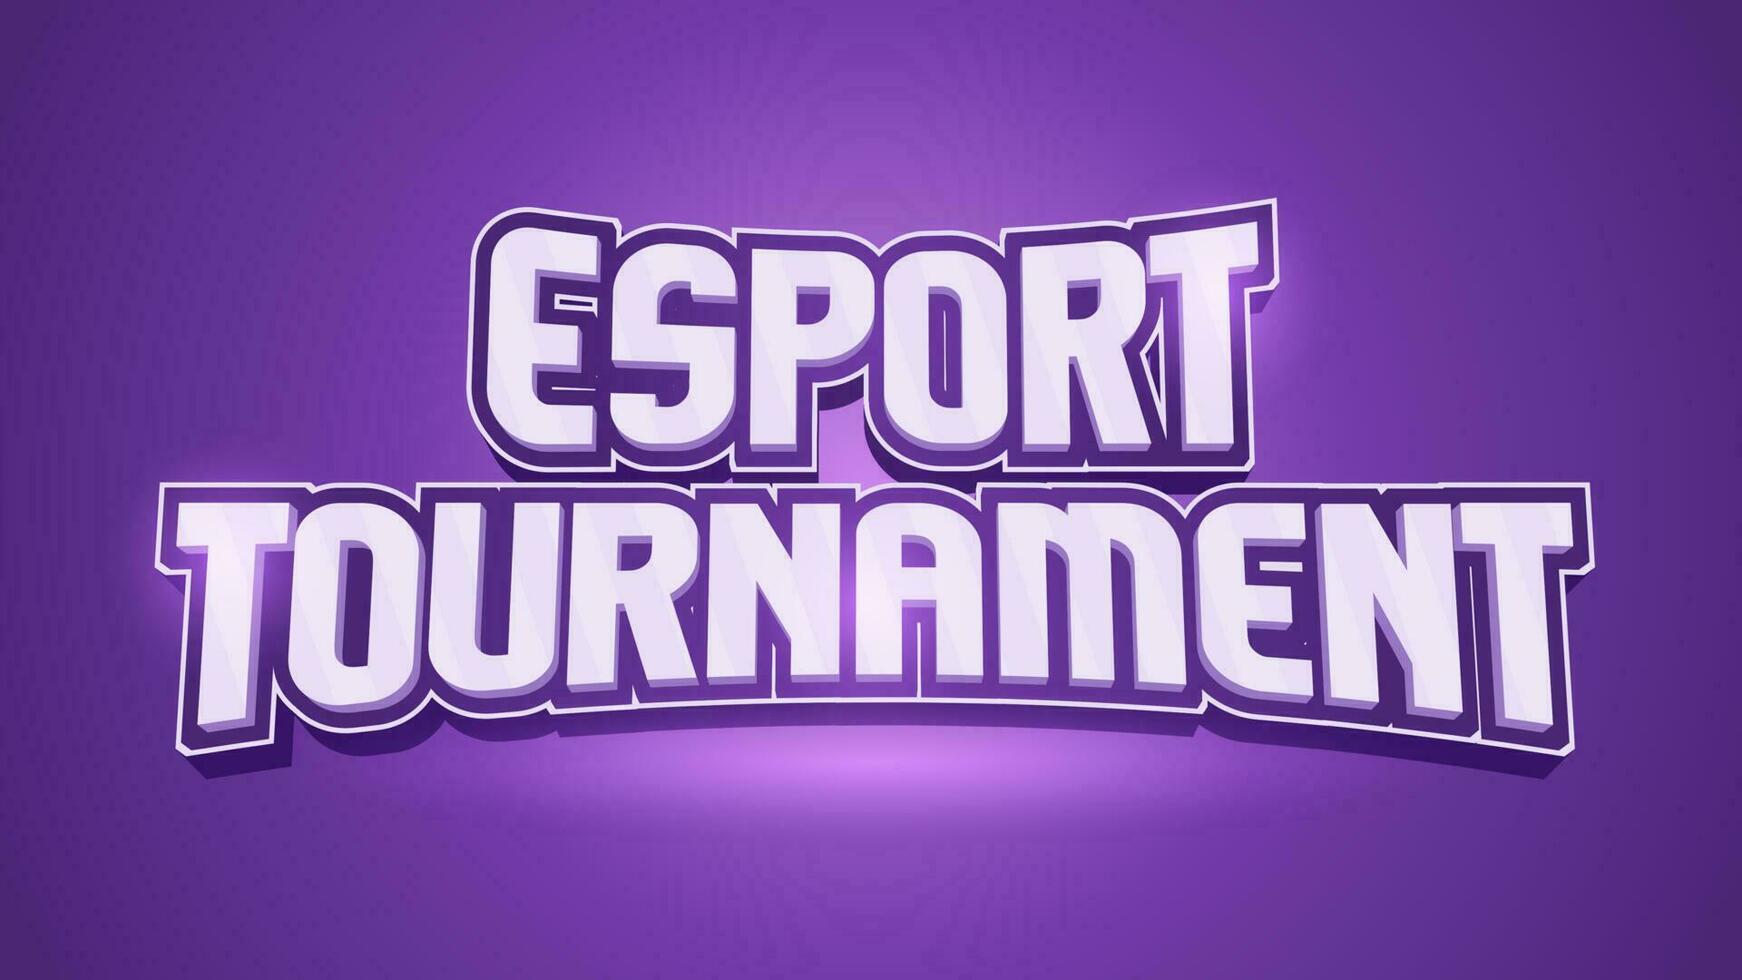 Esport Tournament 3D Typography for Headline and Tittle vector